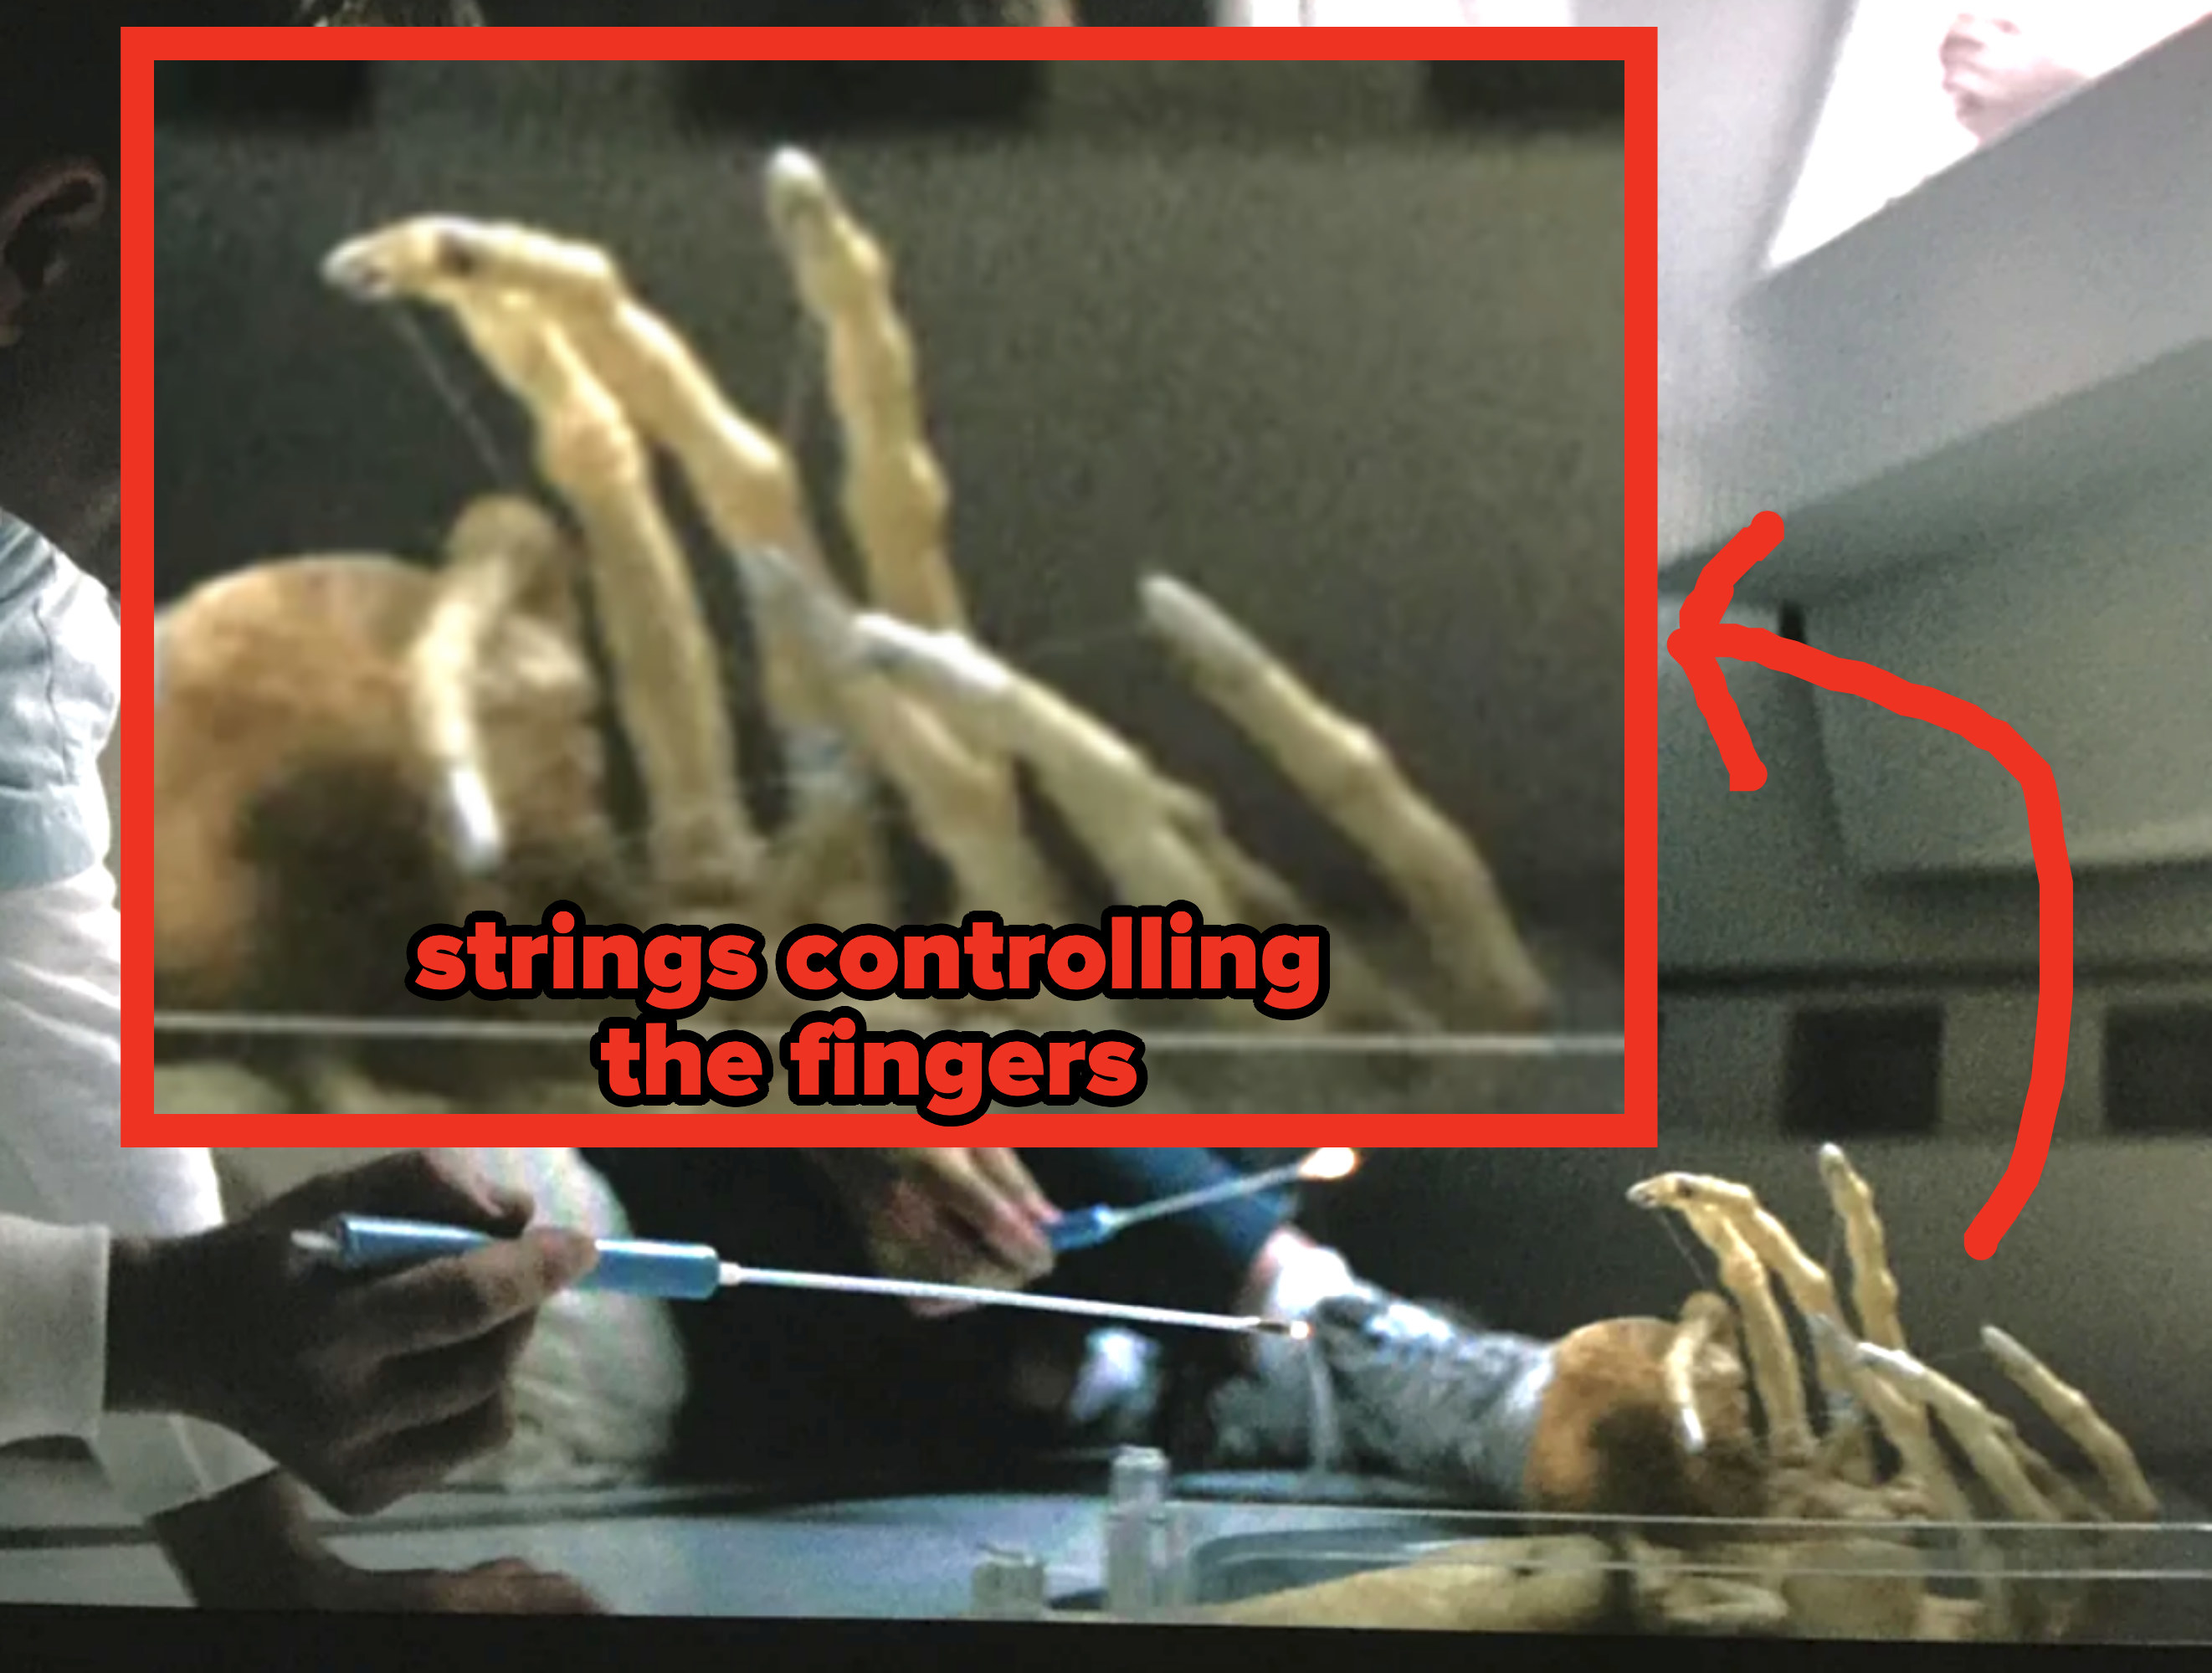 You can faintly see the strings being used to control the alien&#x27;s fingers like a marionette